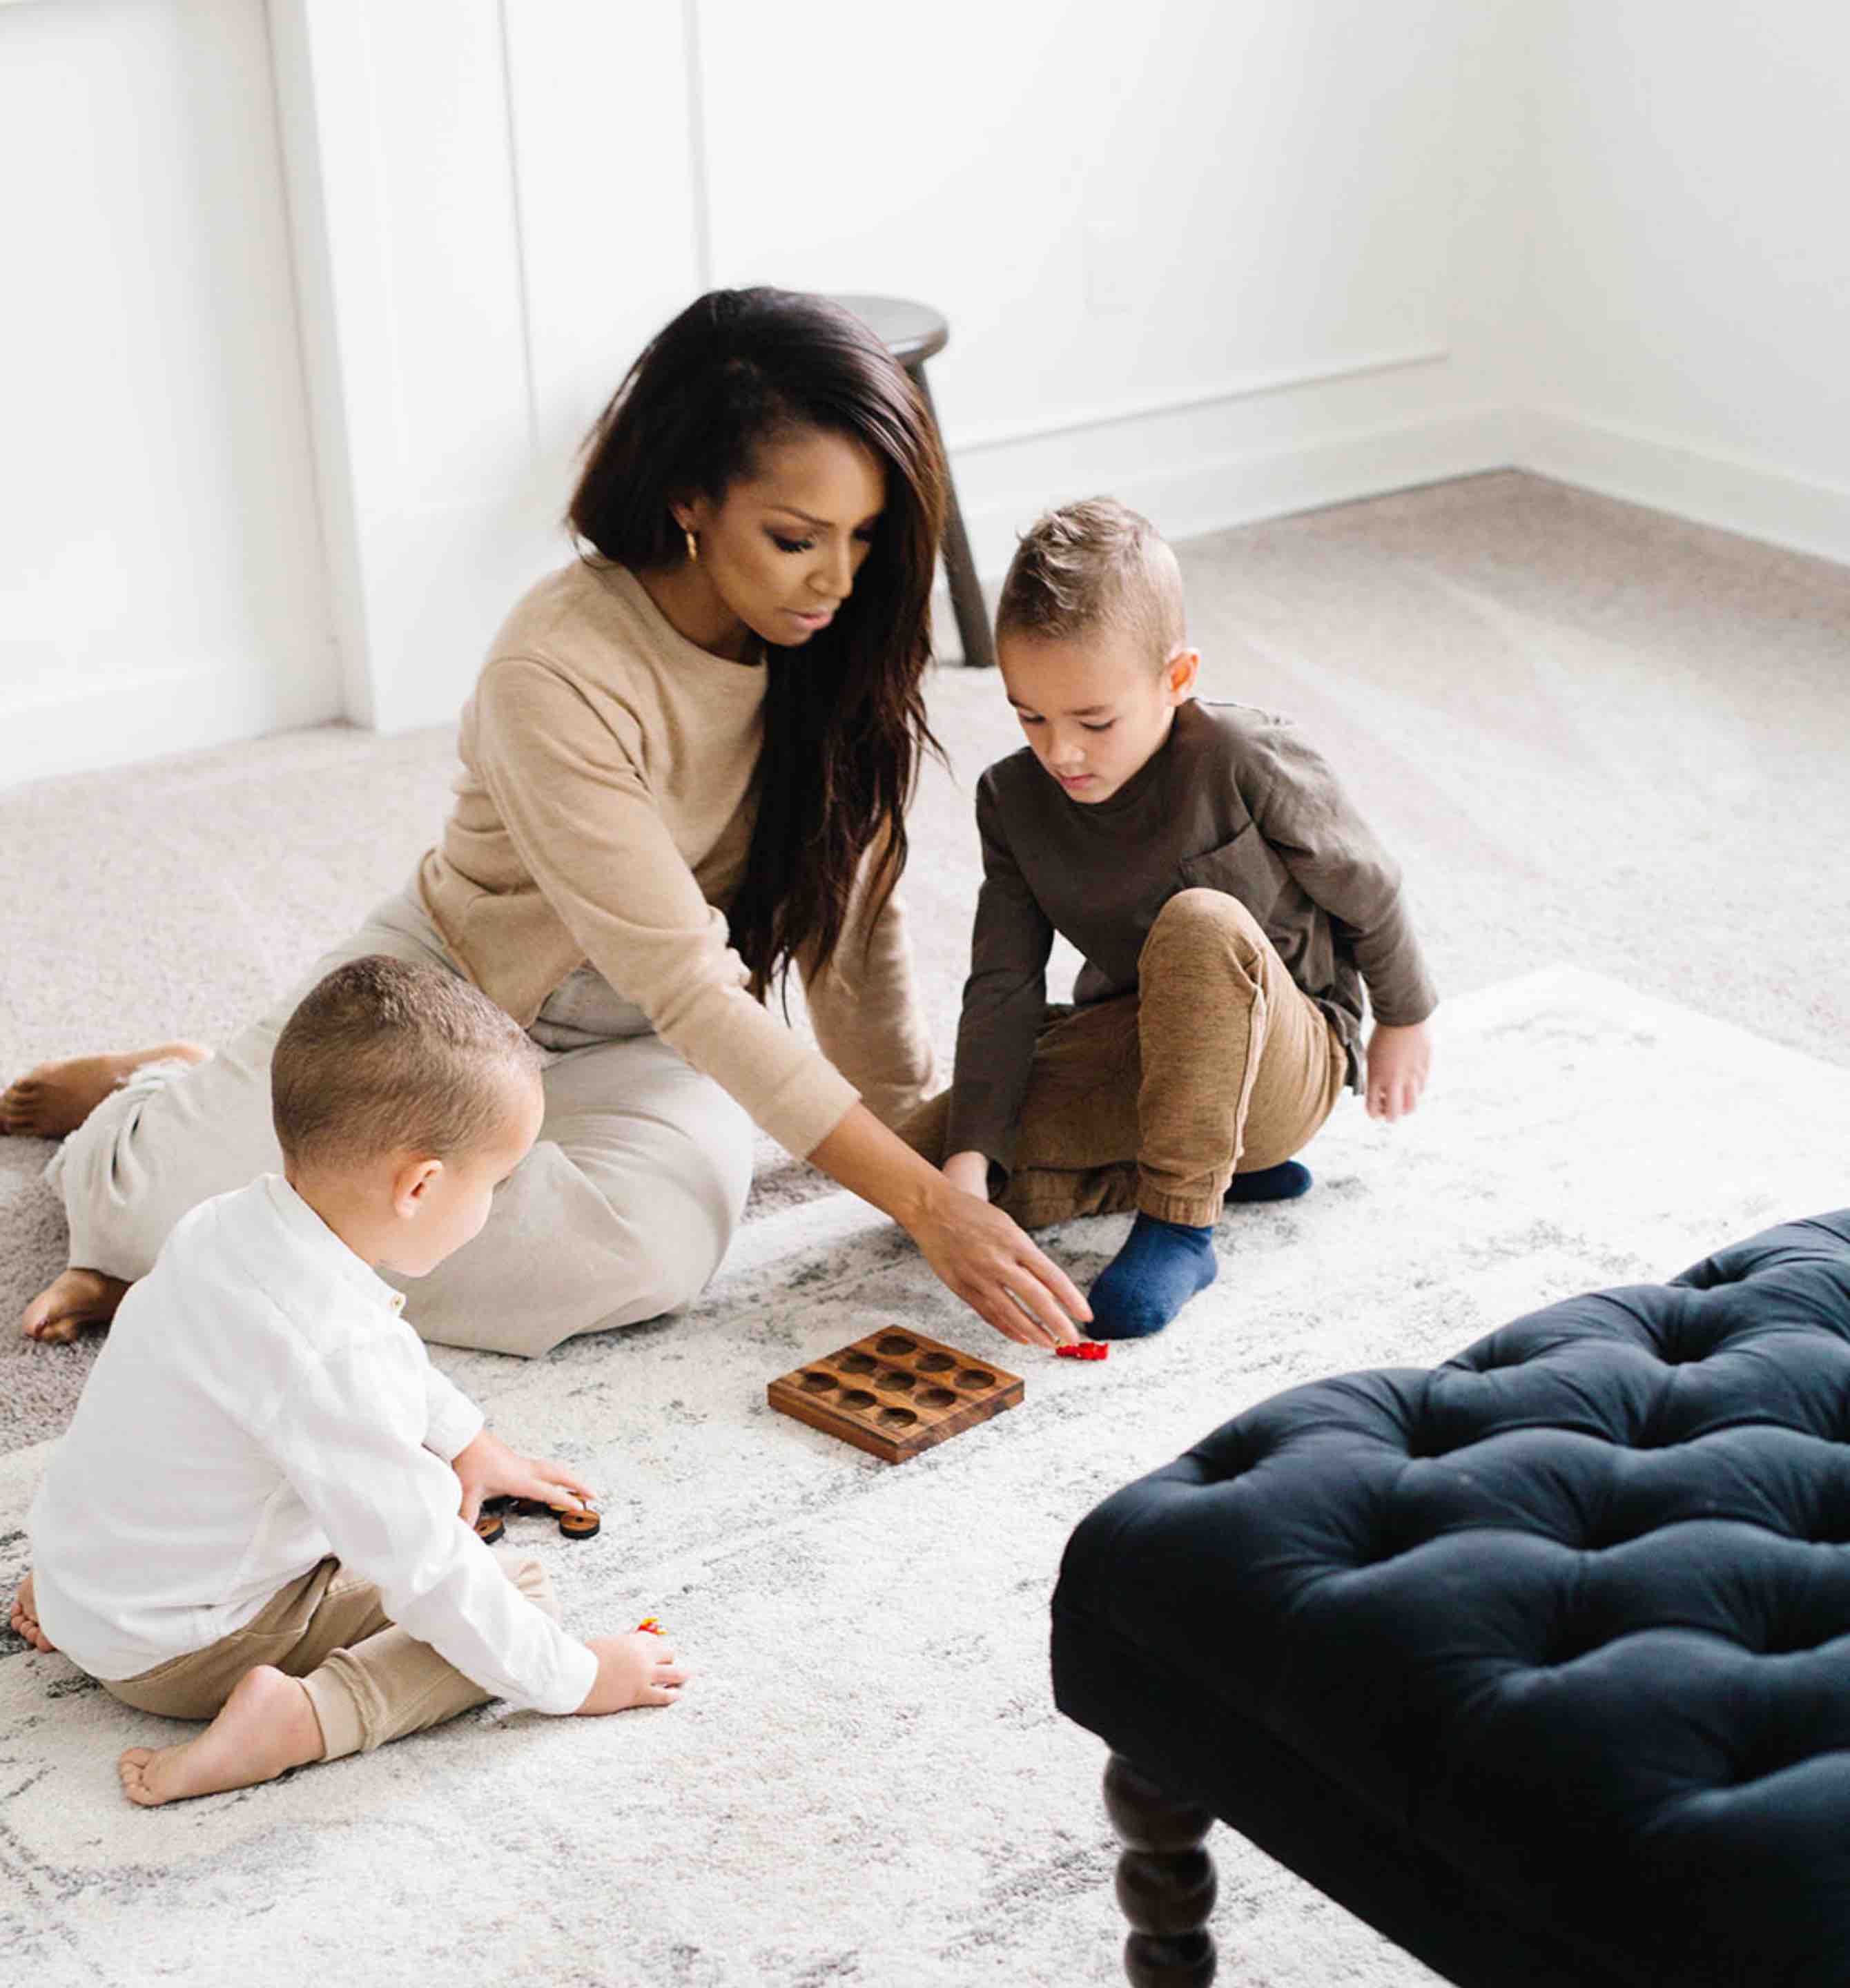 This family is establishing fun routines together with cleaning help from Zerorez Calgary.